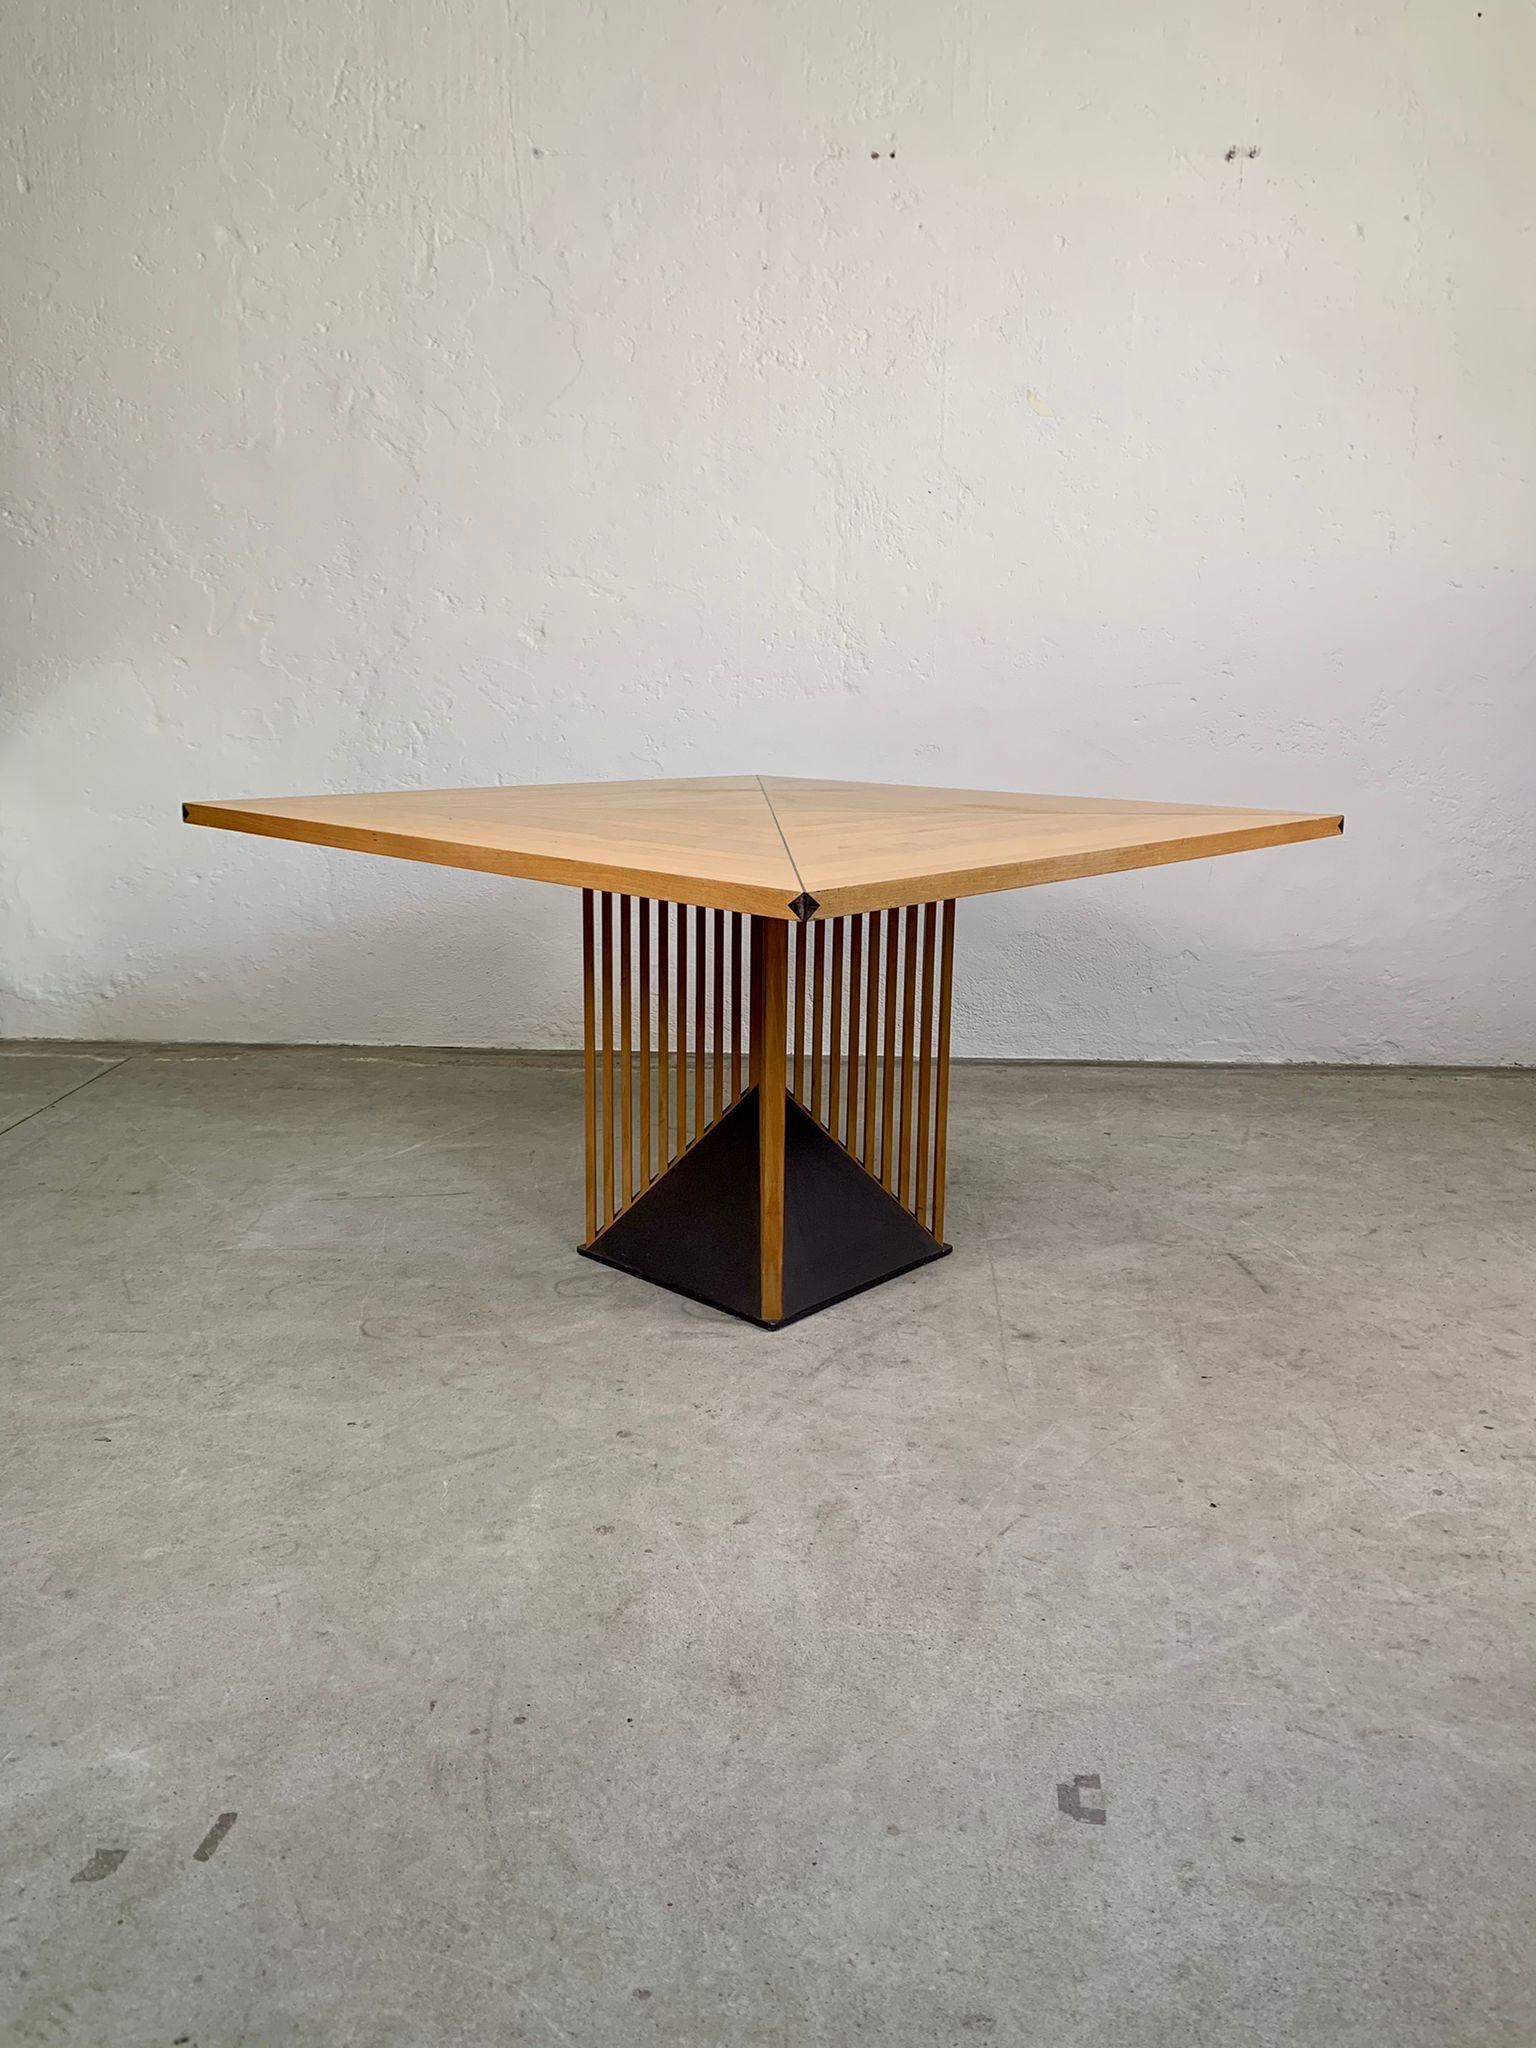 Rare Maestro dining table by Gianfranco Frattini for Acerbis, 1980s
Rare Maestro model dining table, the rarity lies in the square size, we are in possession of the certificate of authenticity of the model designed by Gianfranco Frattini for Acerbis